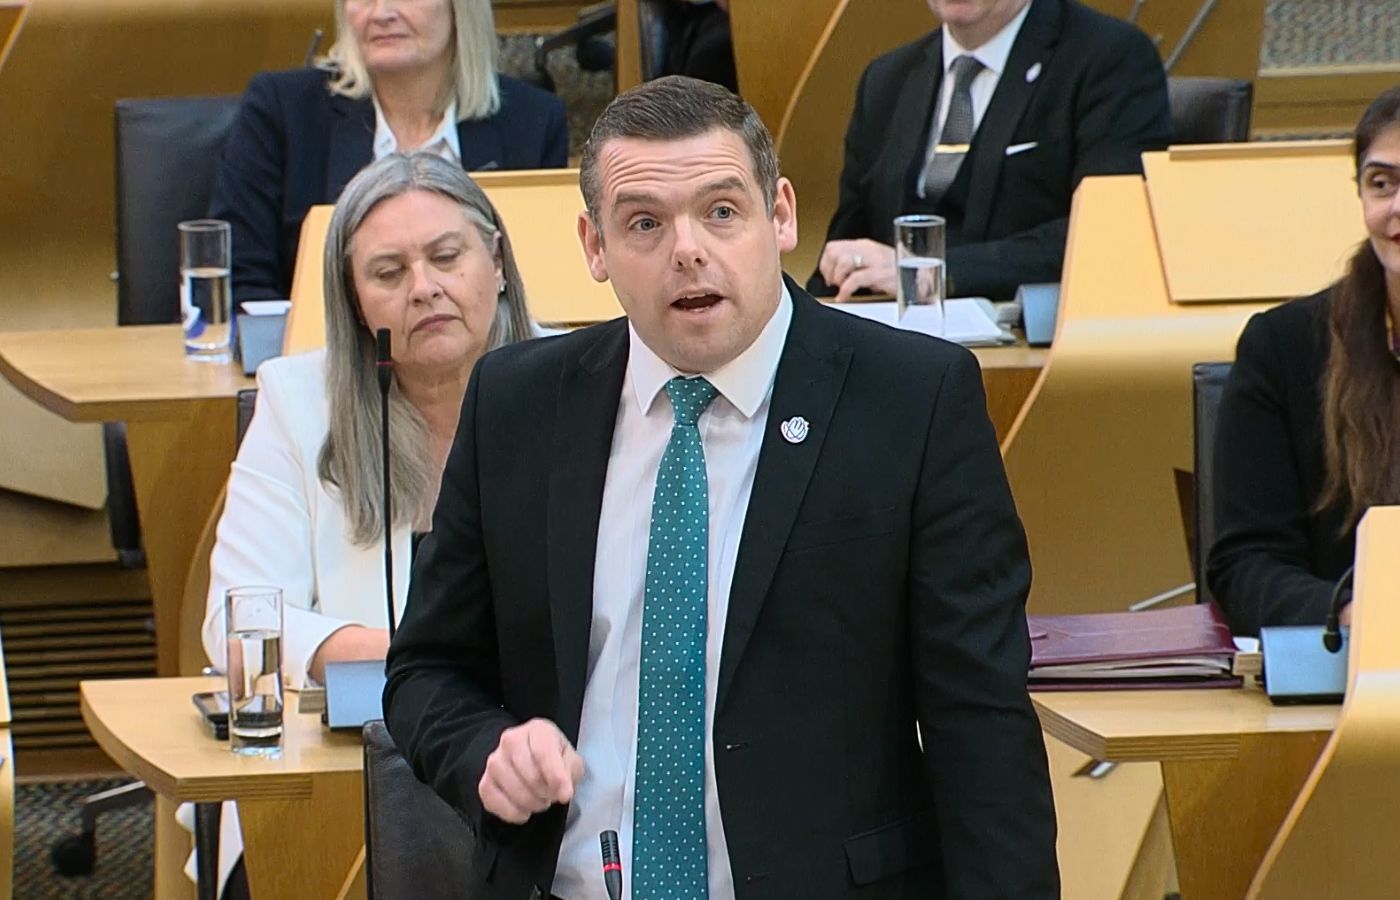 Douglas Ross criticised Scottish Government minister Lorna Slater during FMQs on Thursday.